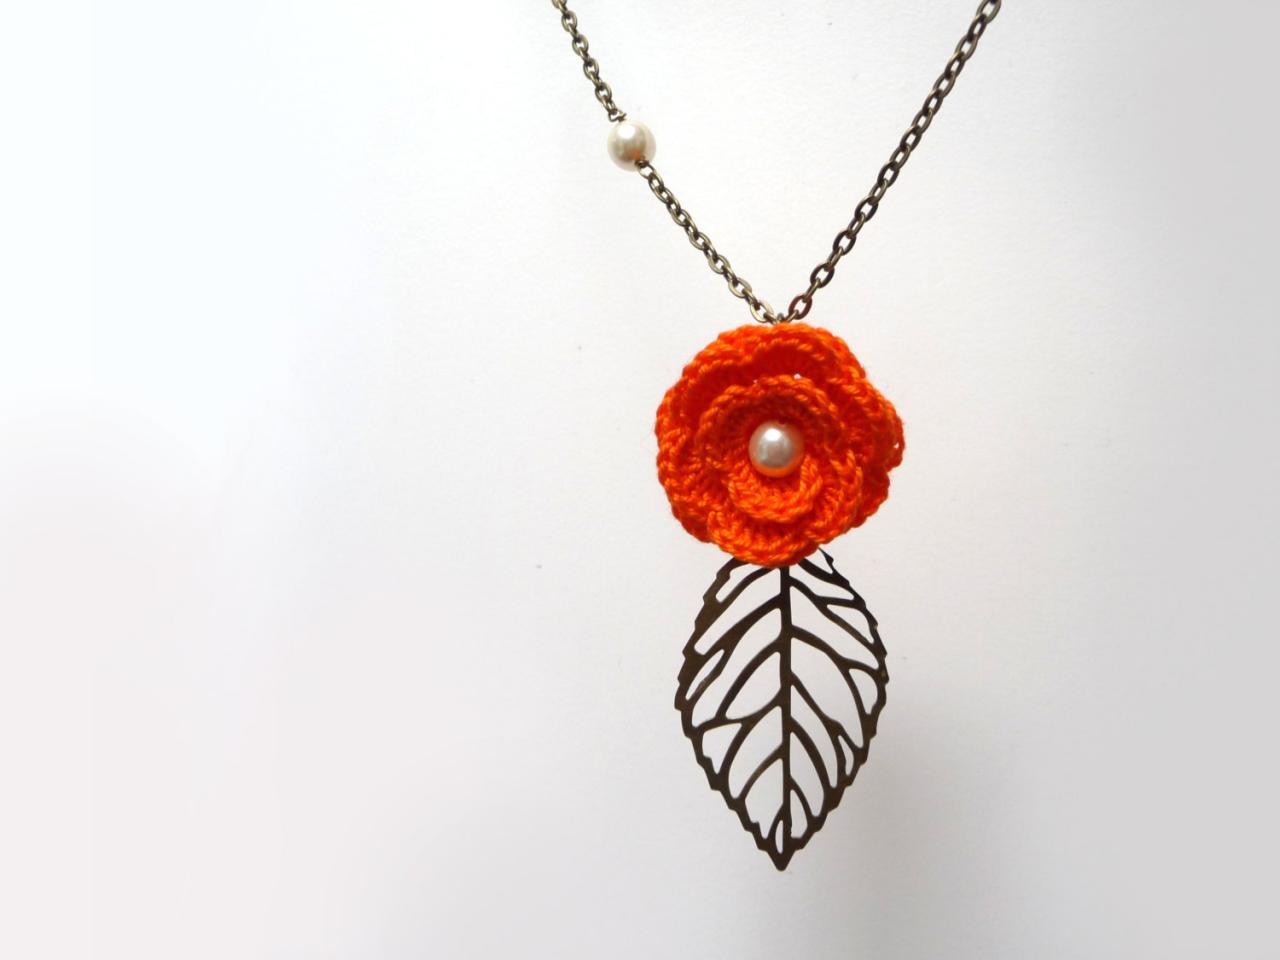 Crochet Flower Necklace With Brass Chain And Leaf - Orange Cotton Flower With Pearls - Choose The Color